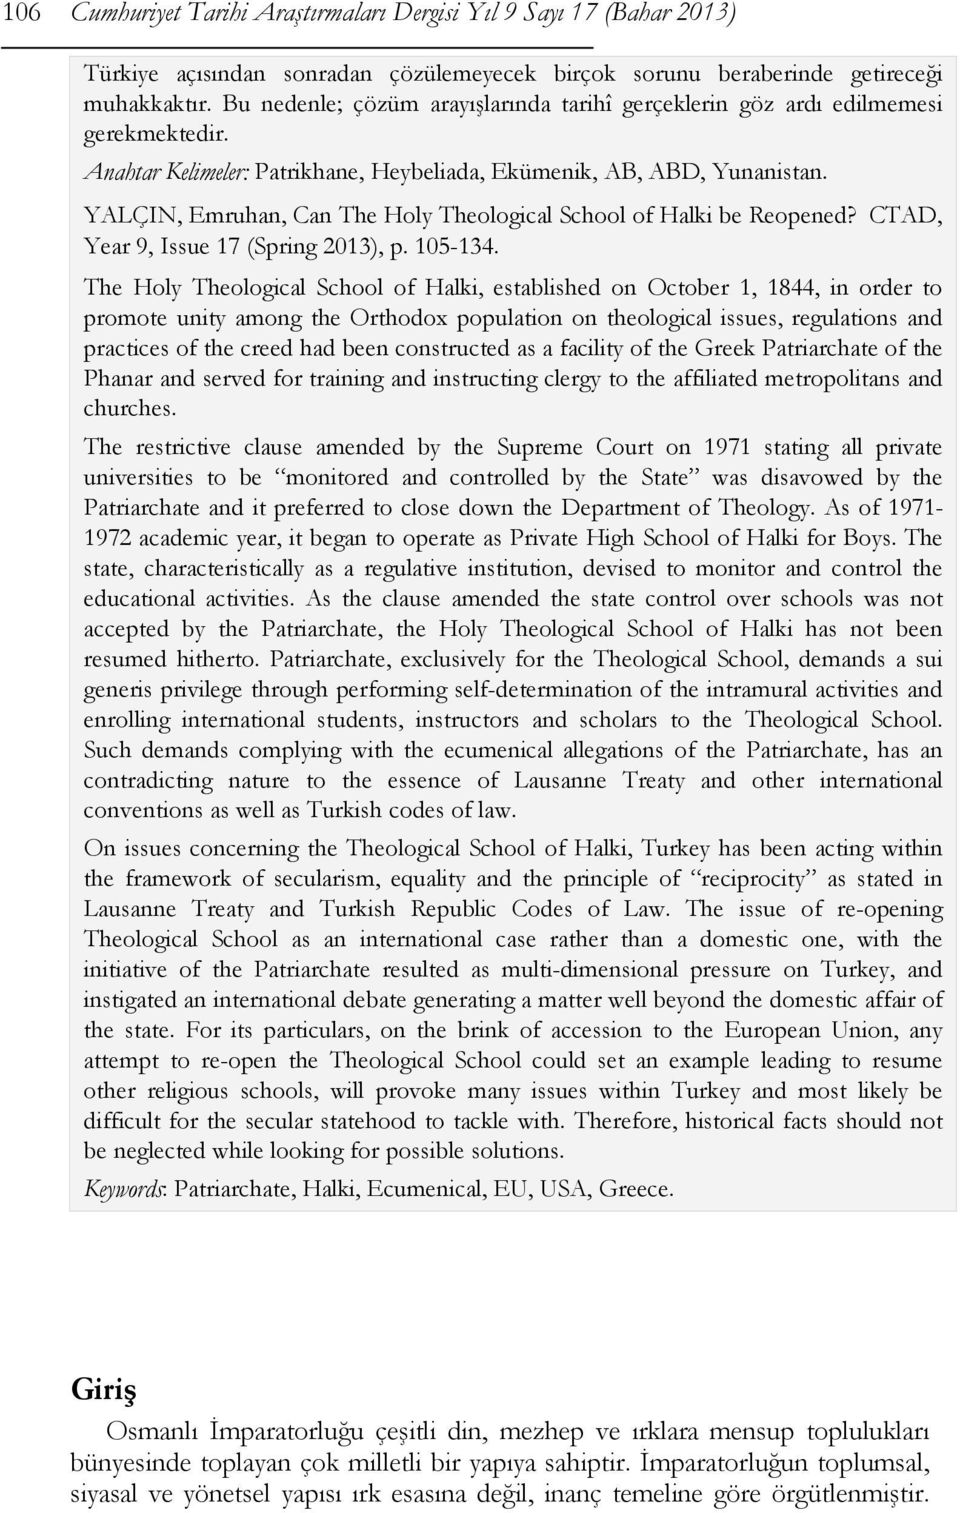 YALÇIN, Emruhan, Can The Holy Theological School of Halki be Reopened? CTAD, Year 9, Issue 17 (Spring 2013), p. 105-134.